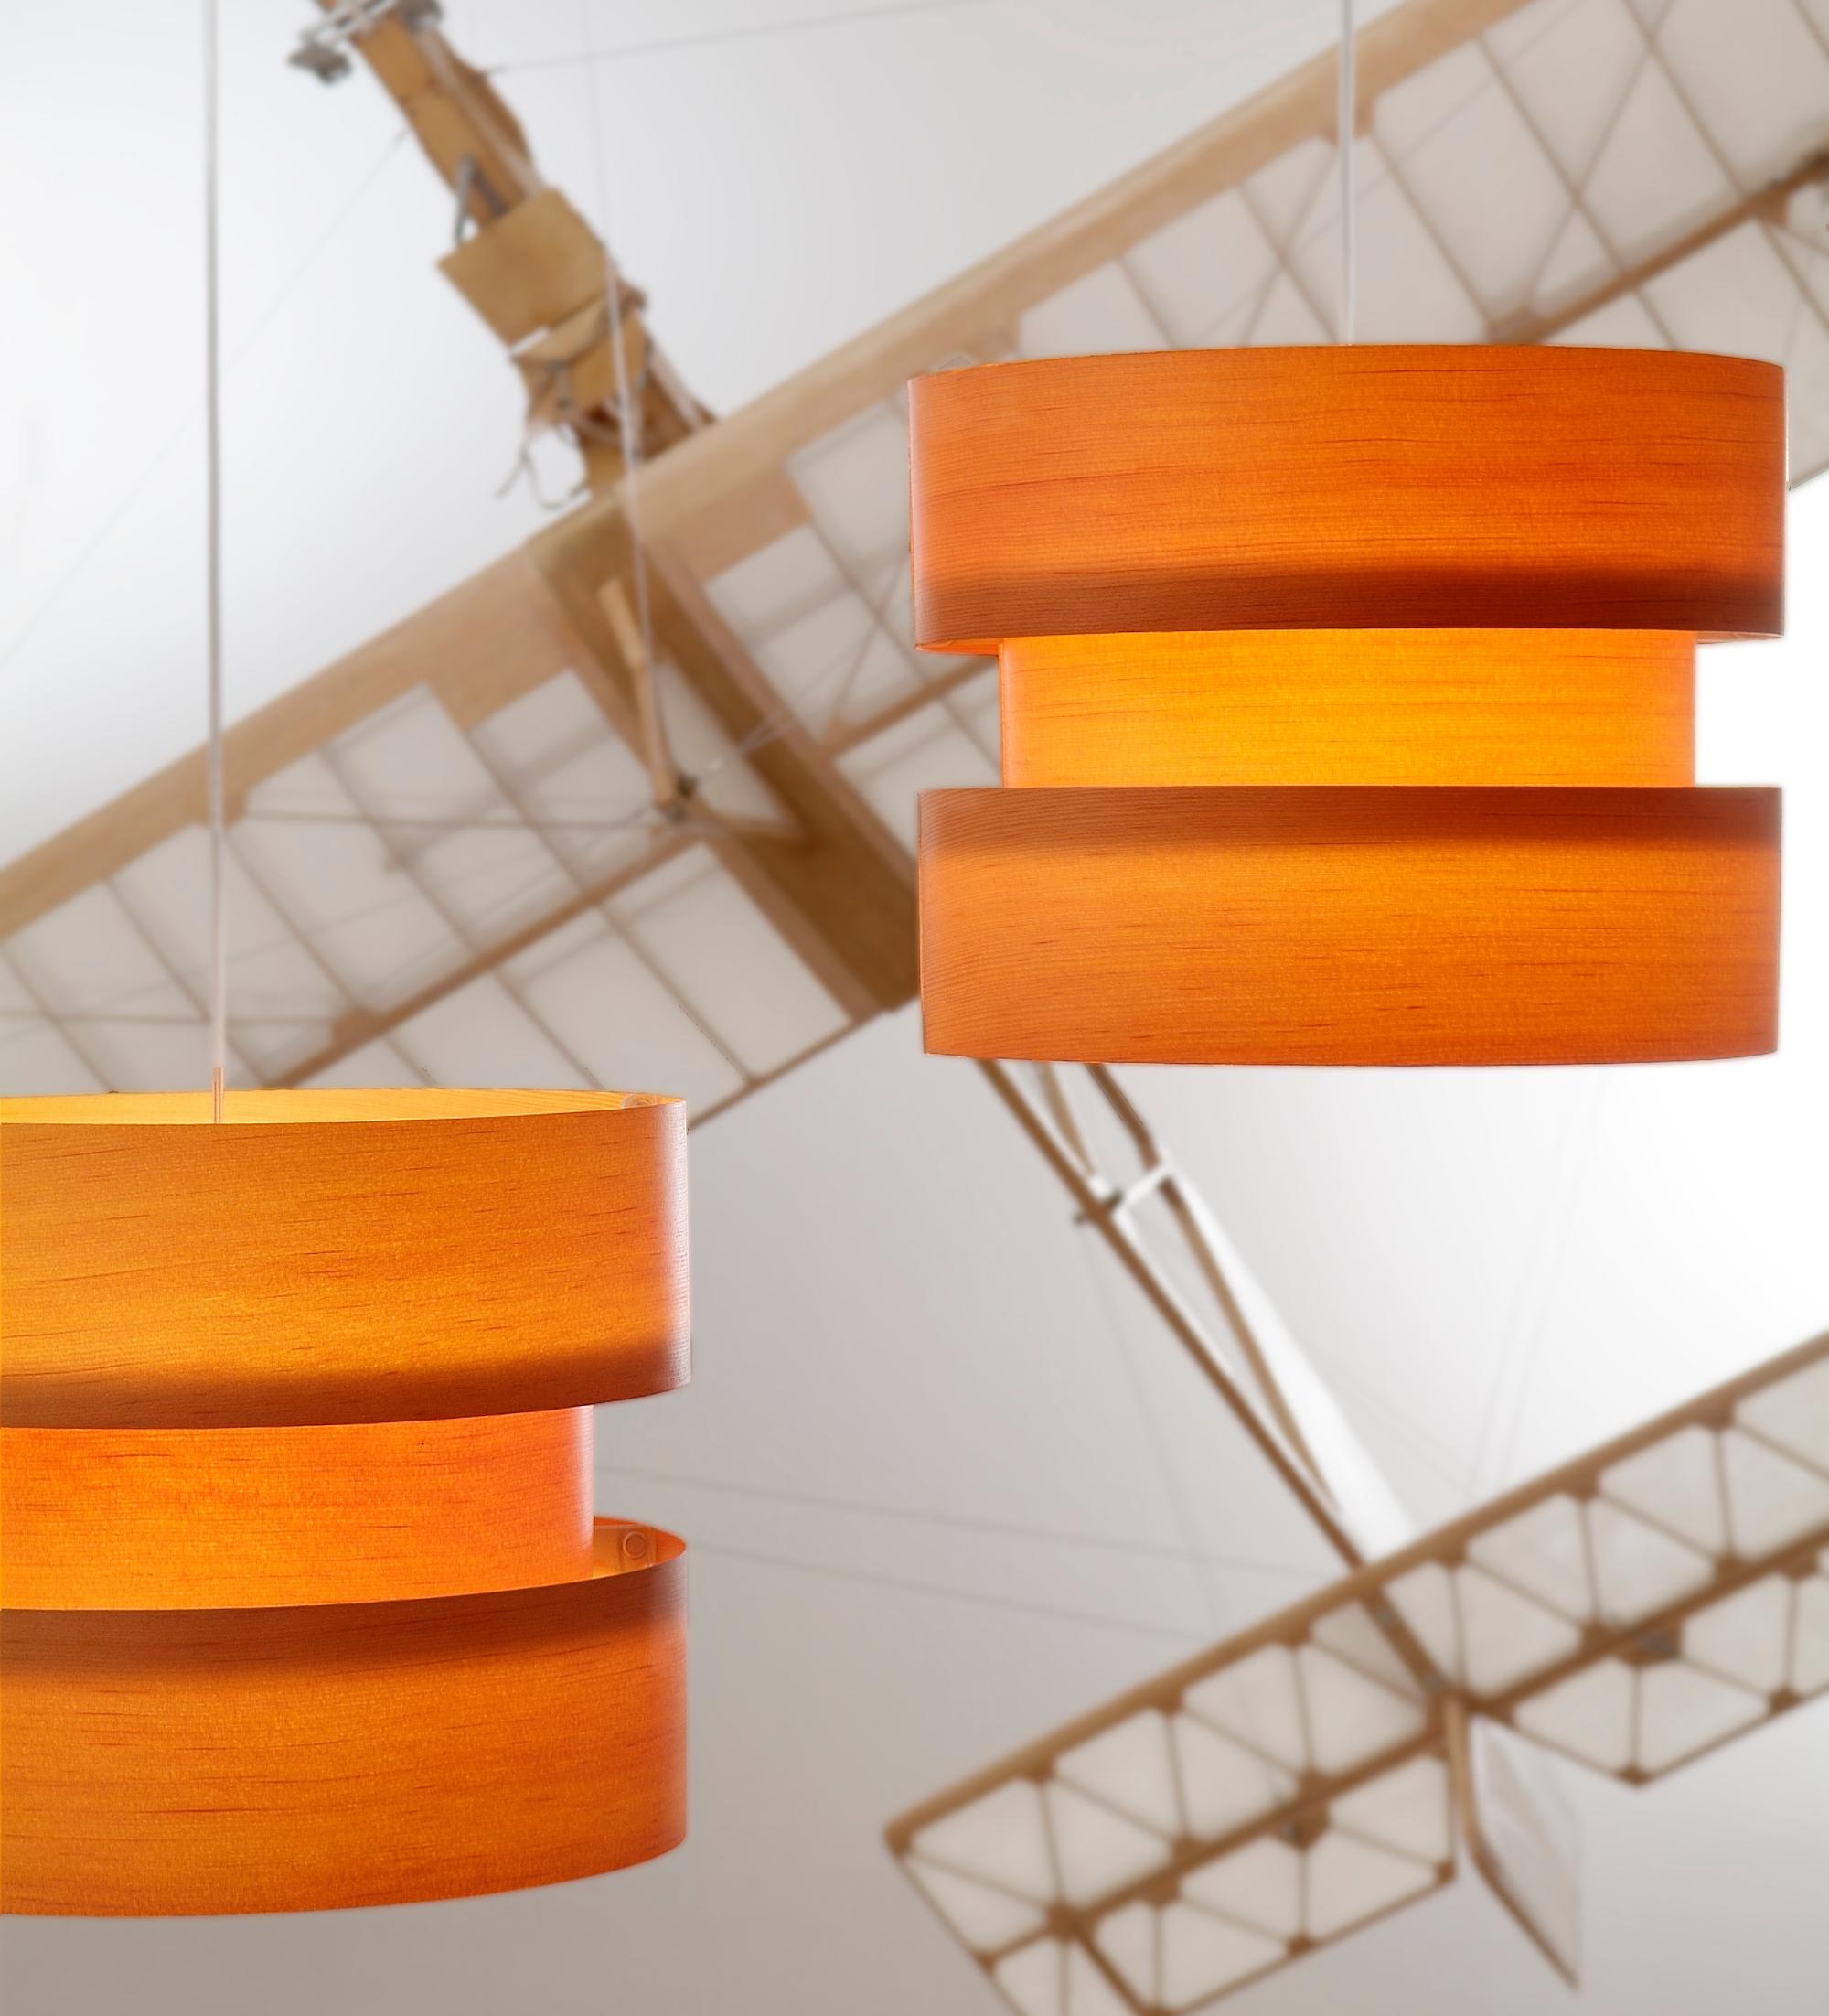 Large J.A. Coderch 'Cister Grande' Wood Suspension Lamp for Tunds For Sale 12